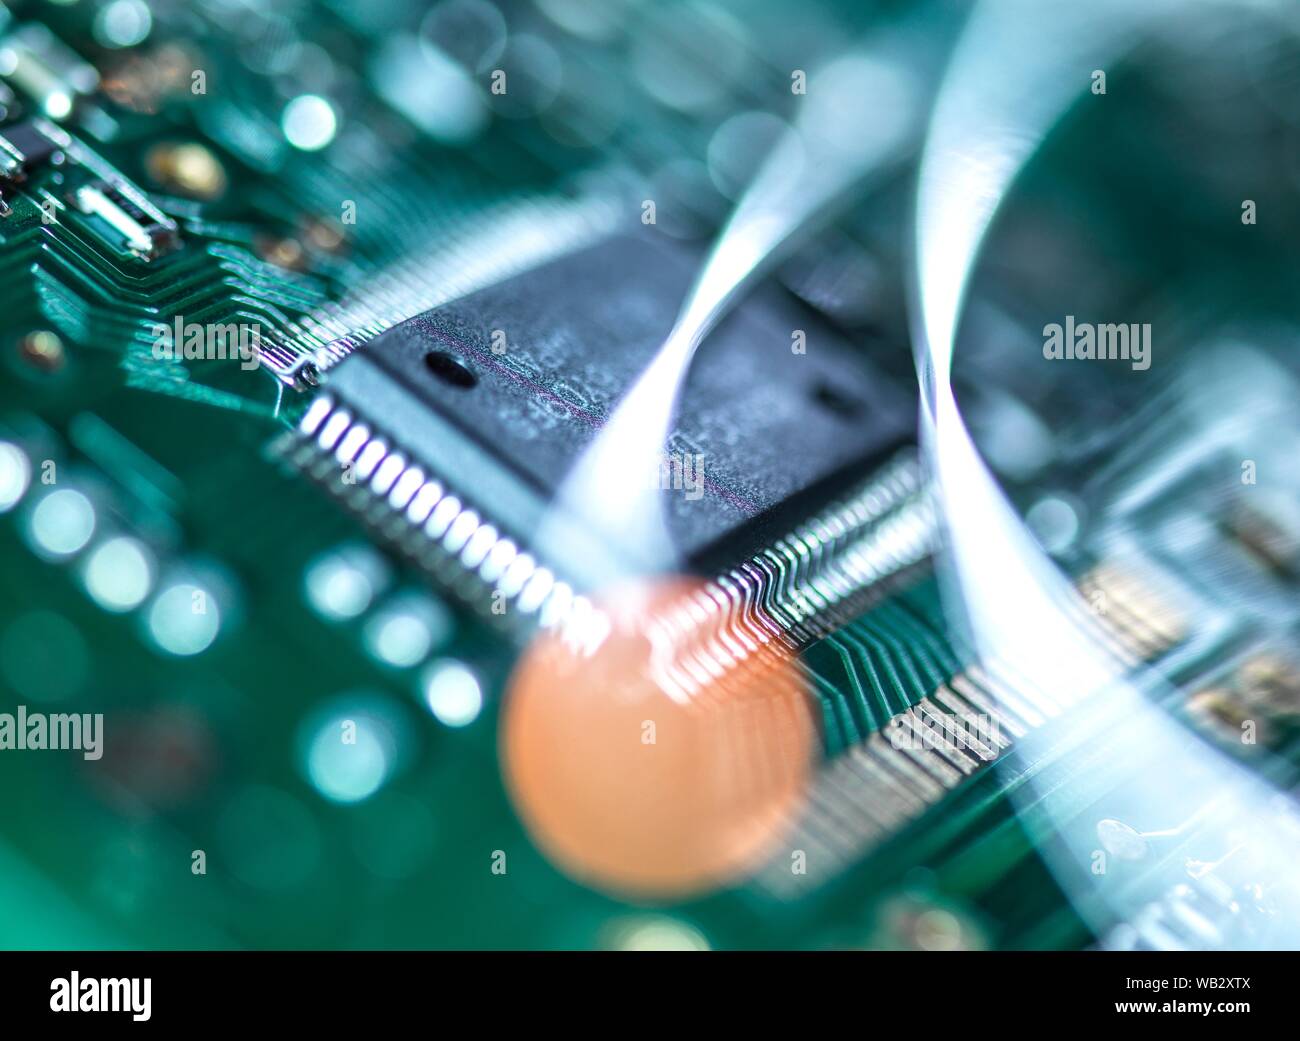 Digital communication, conceptual image. Fibre optics carrying data over electronic circuitry on a laptop computer. Stock Photo